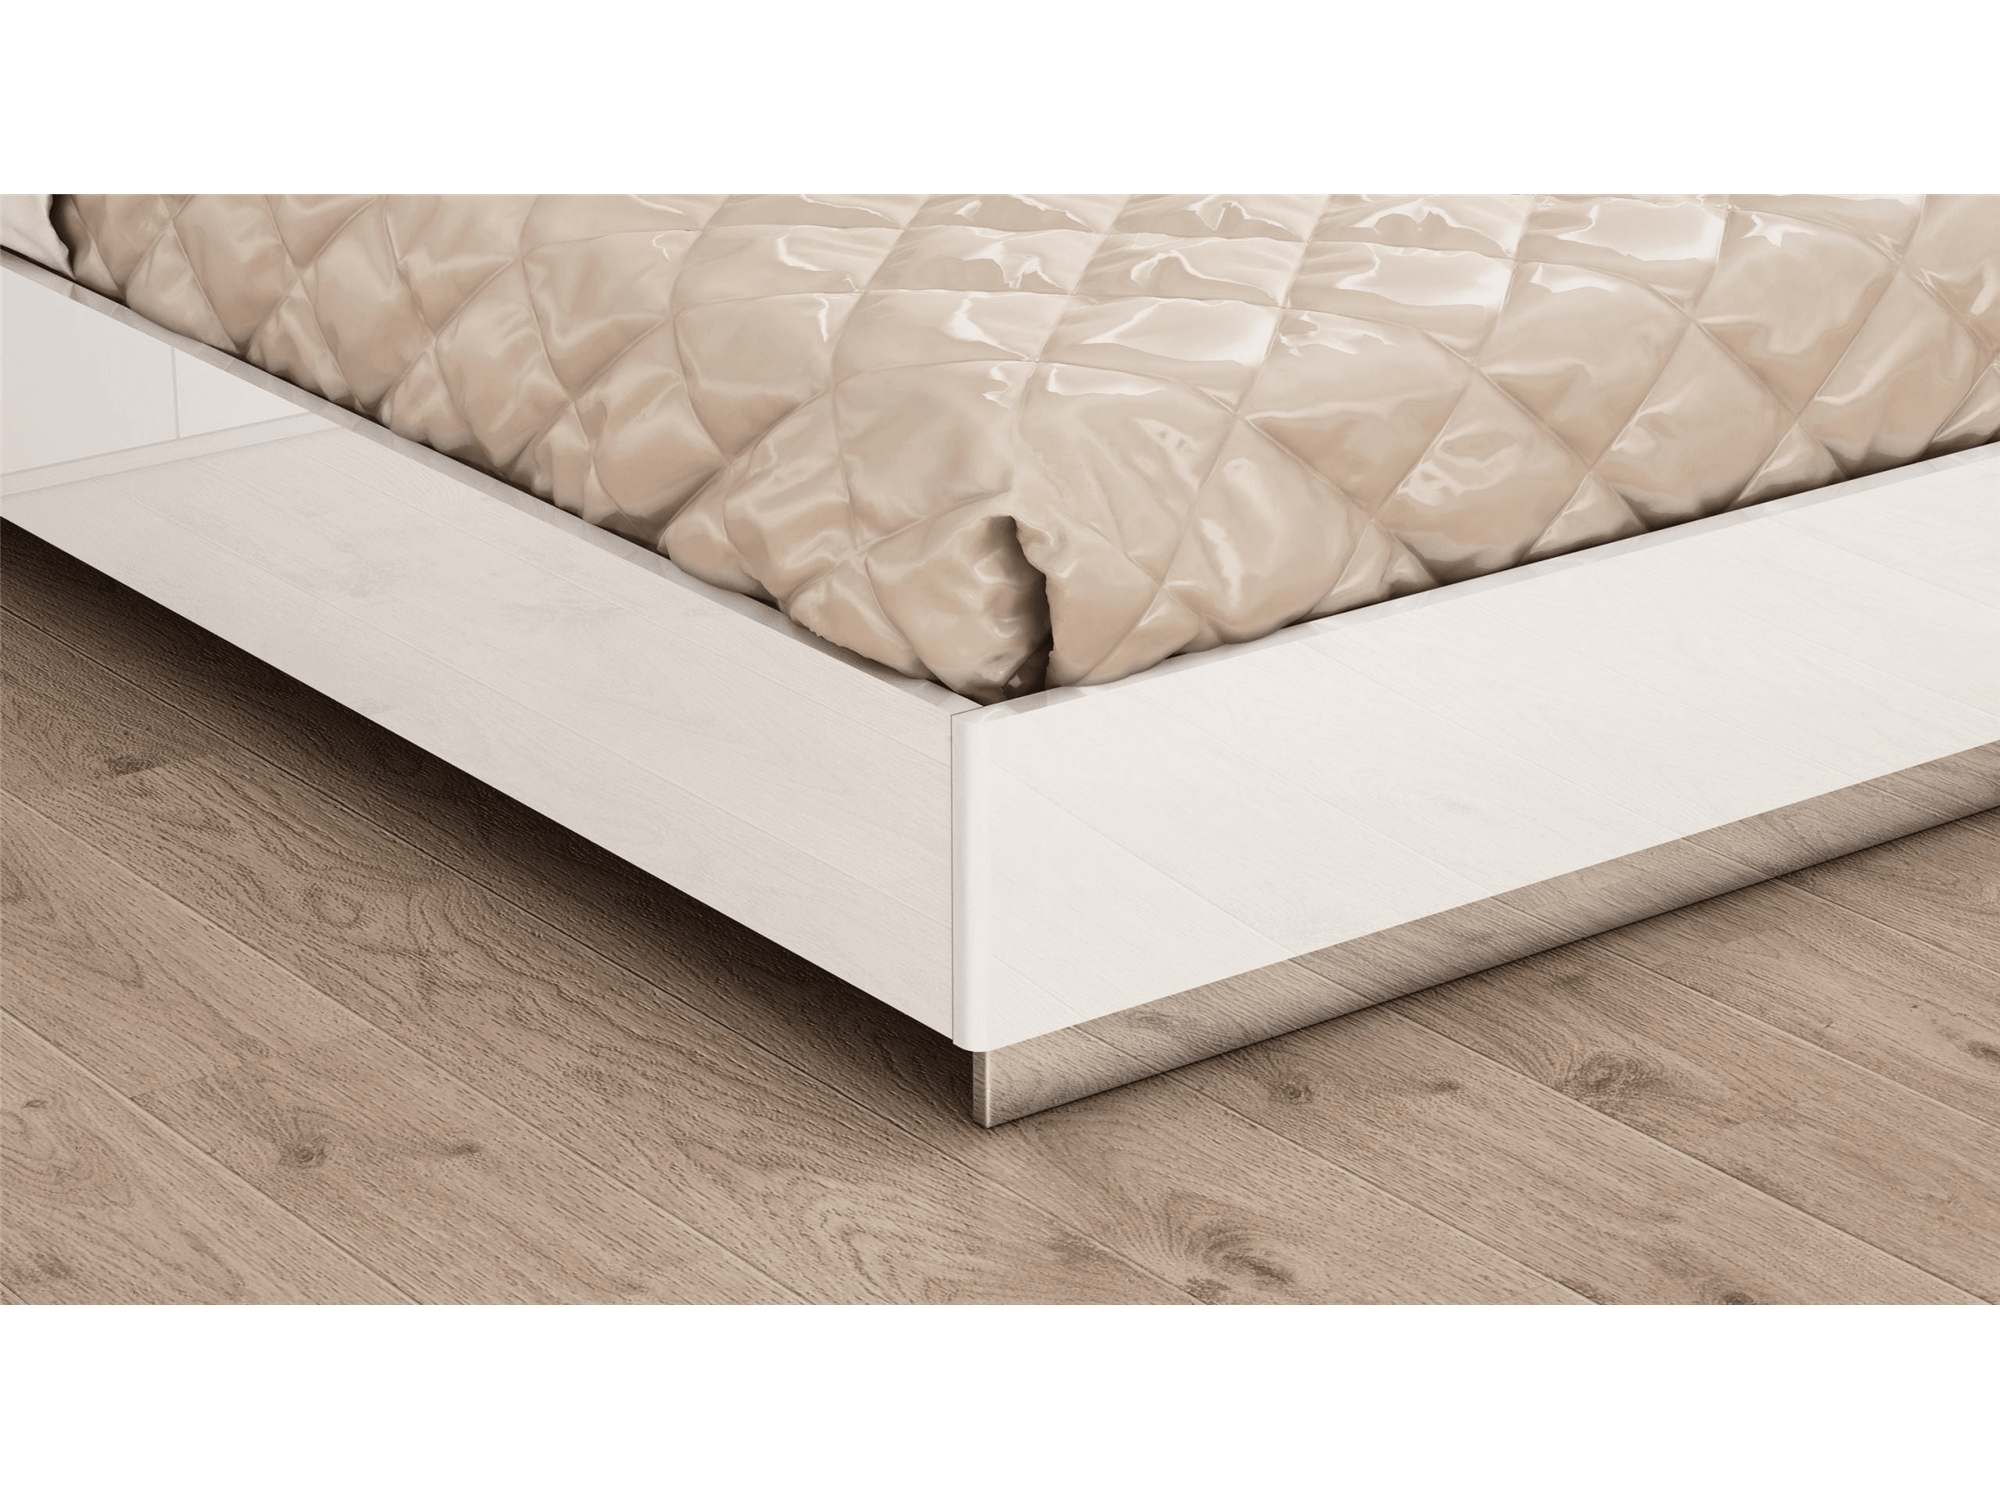 Daisy Bed King - Euro Living Furniture